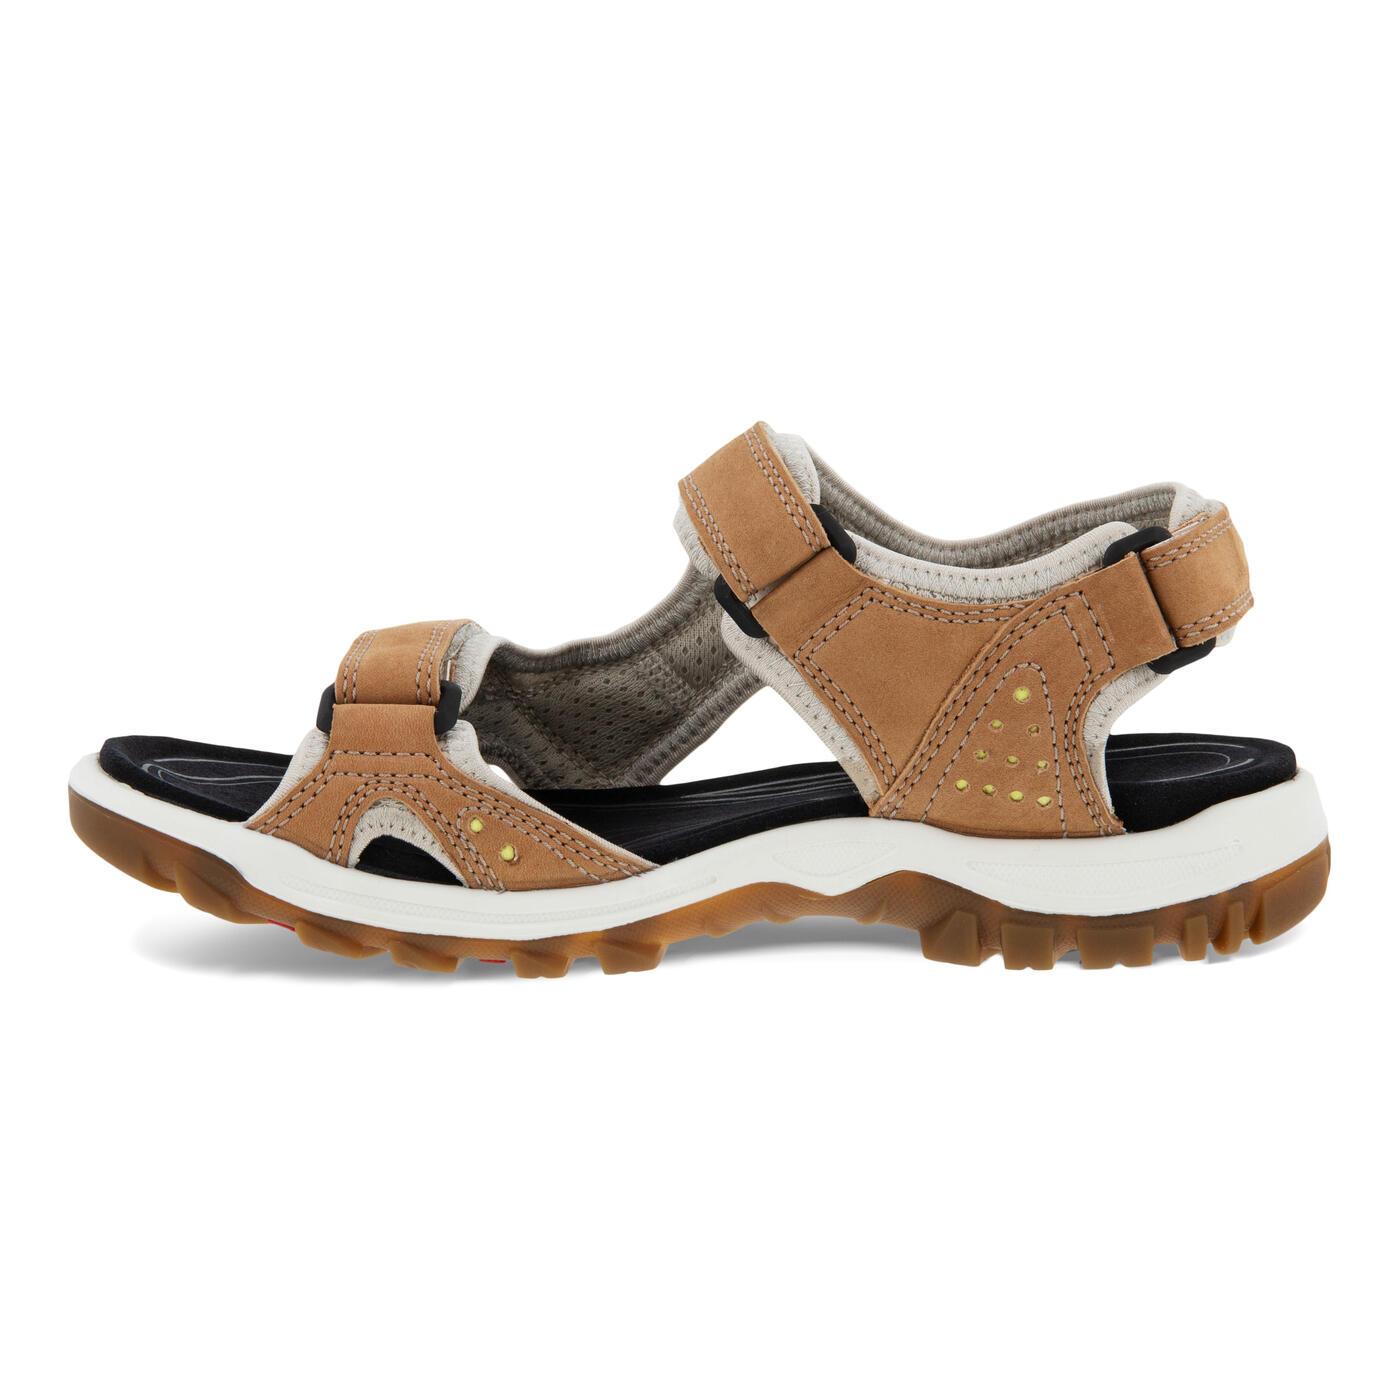 Ecco Offroad Lite Sandal 3s Size in Brown | Lyst